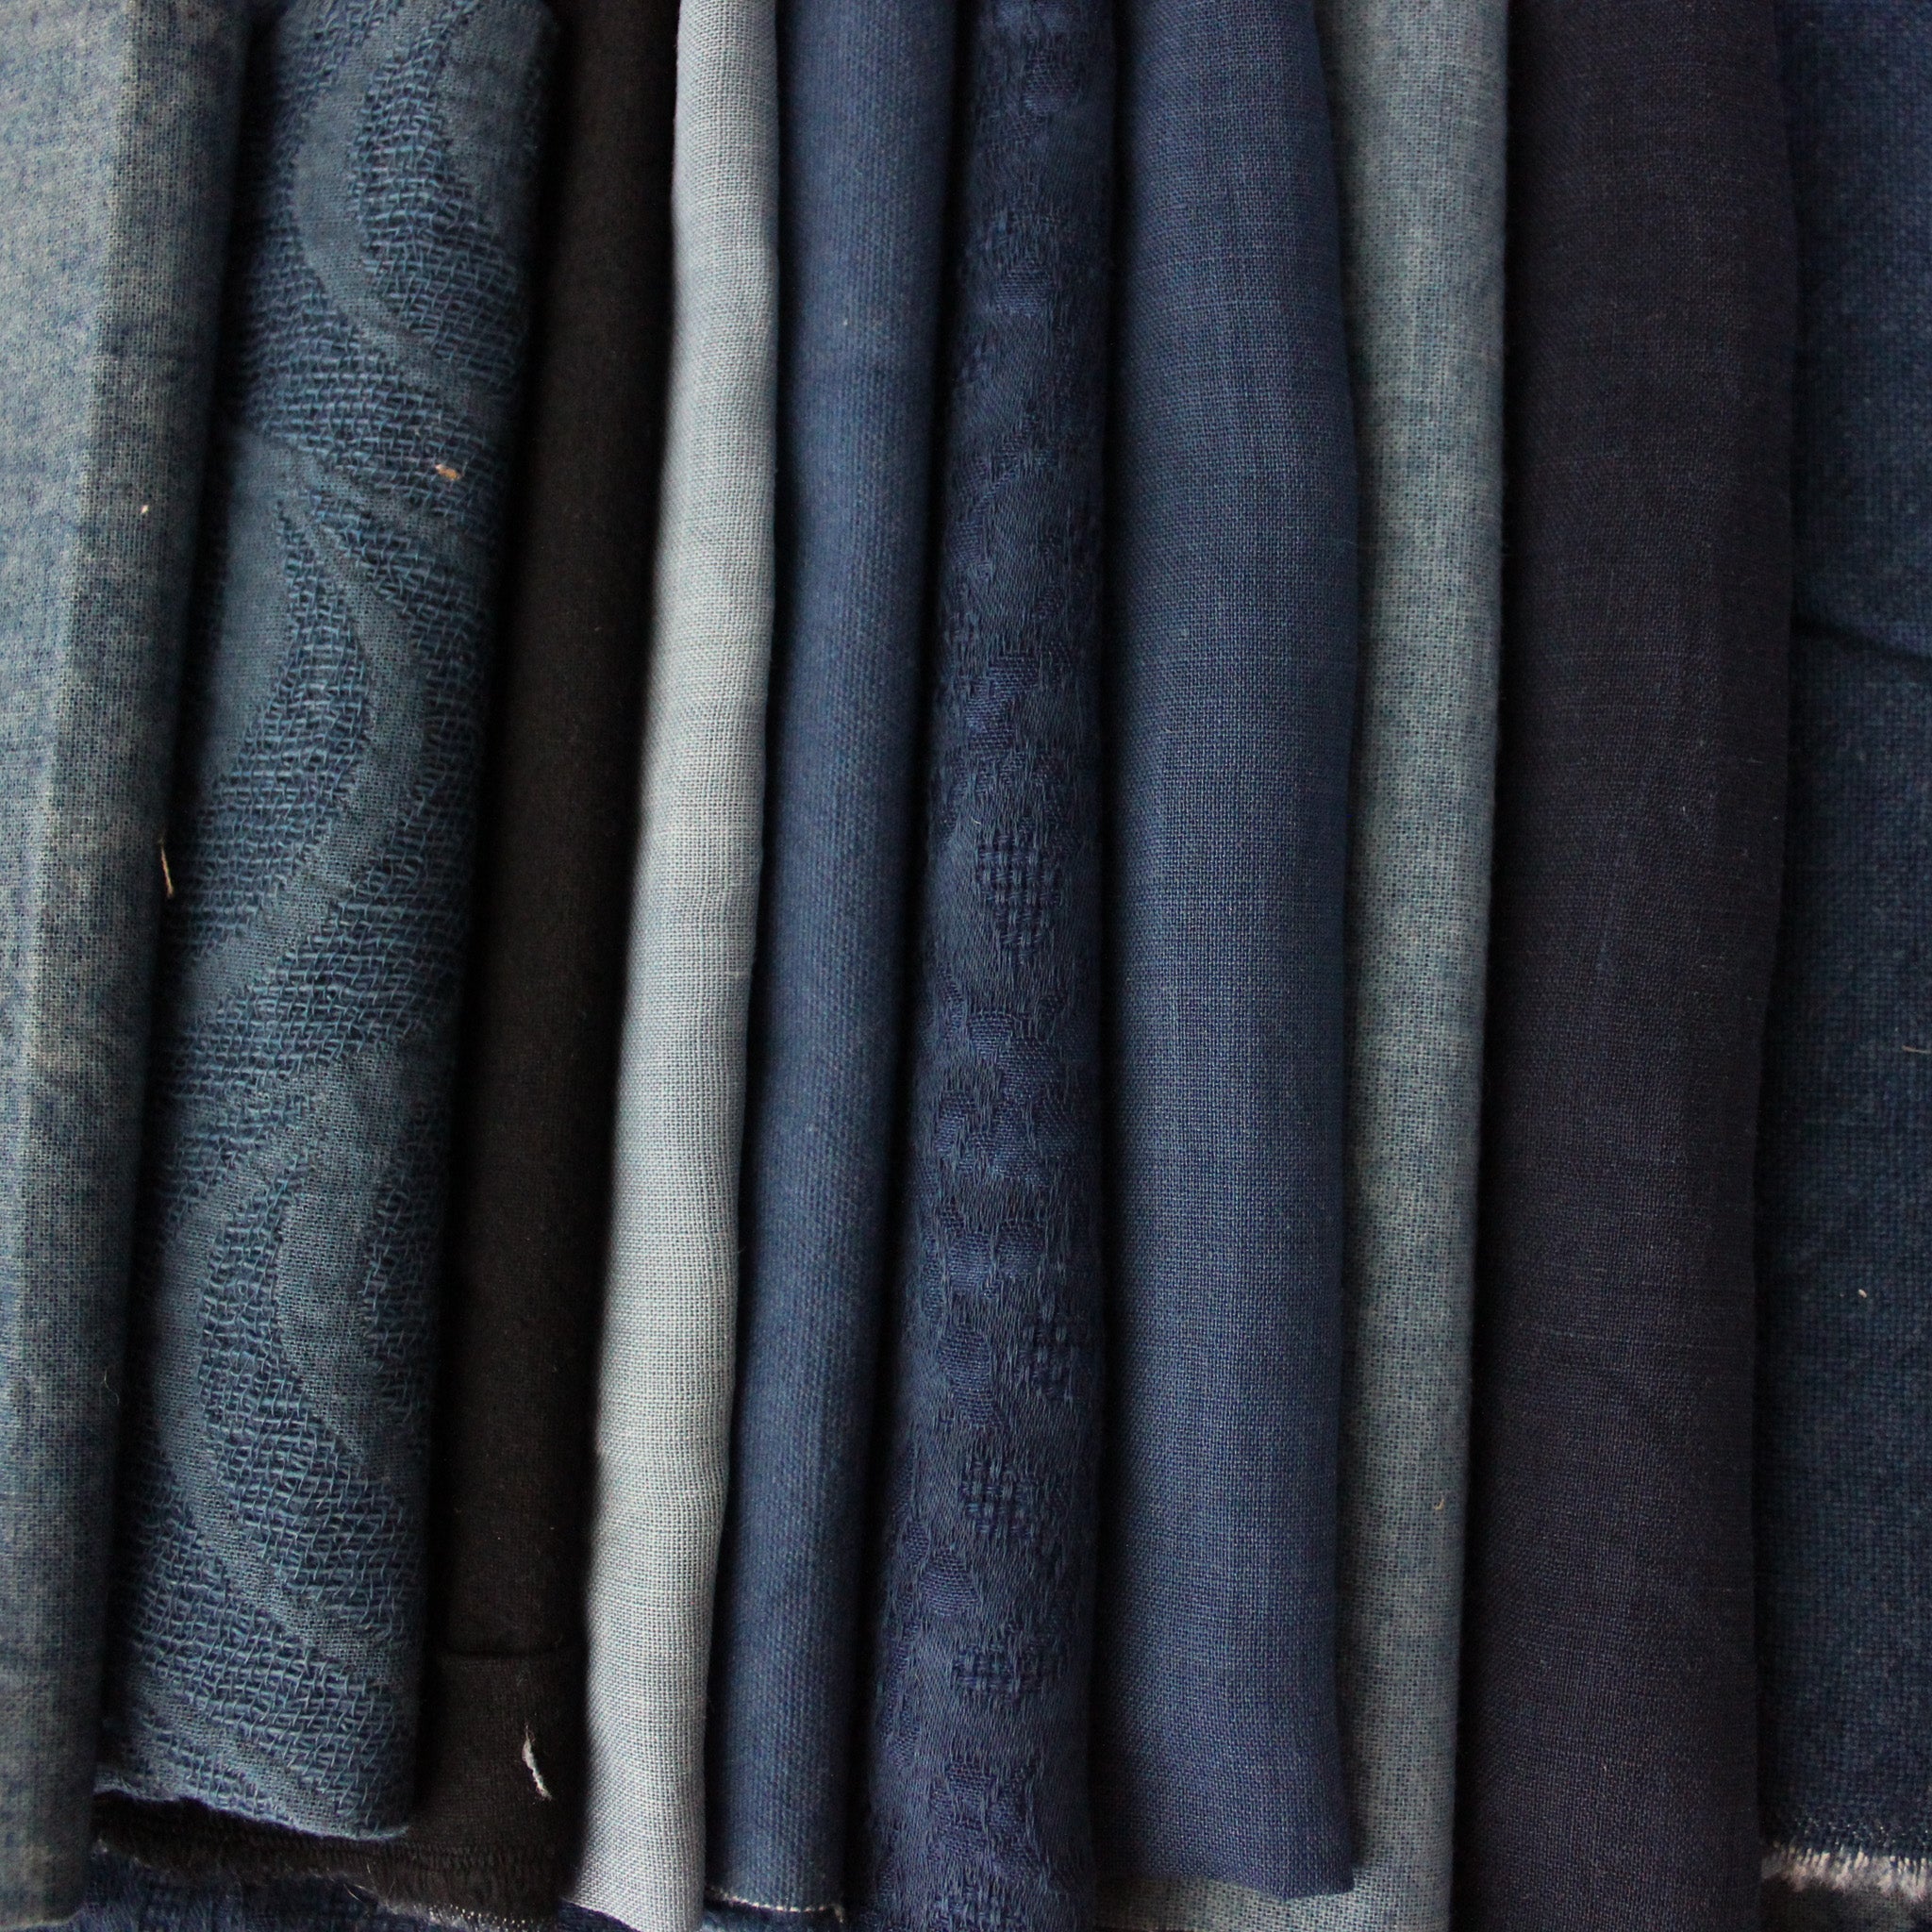 Hand Dyed Indigo Fabric Remnants - Tribe Castlemaine